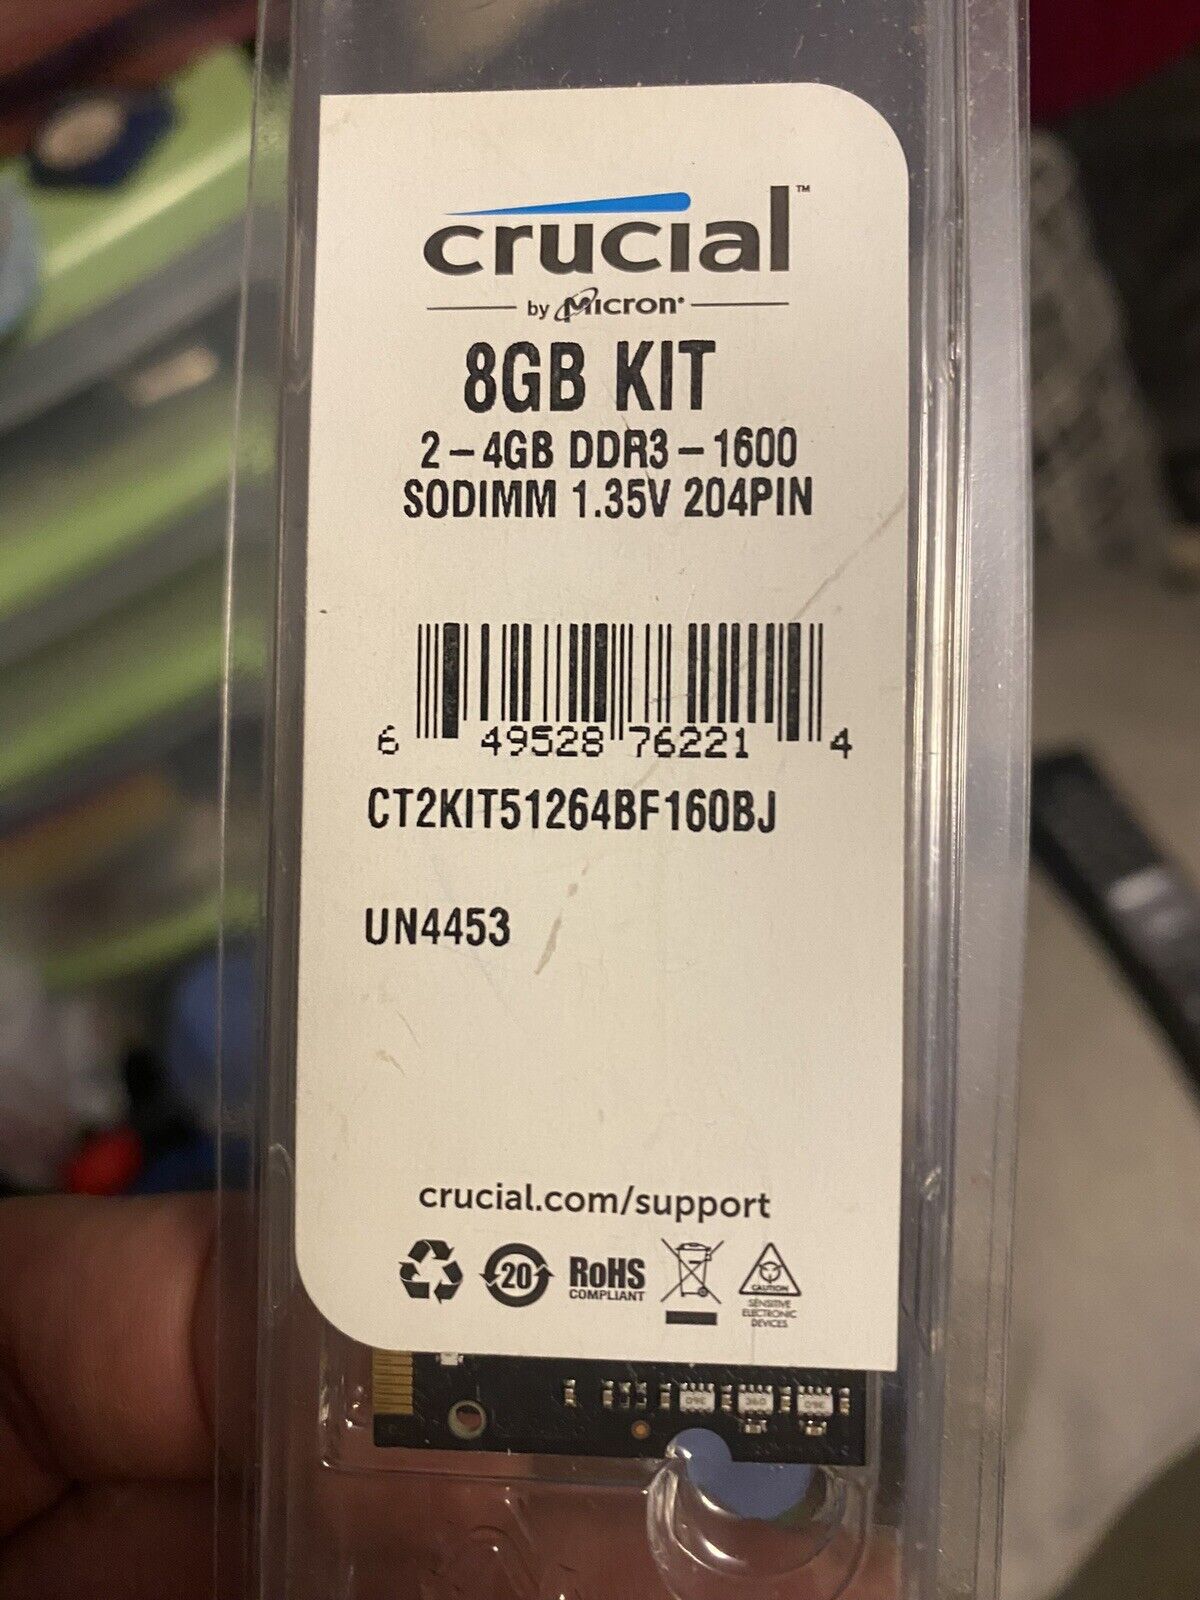 CRUCIAL by Micron 8GB Kit